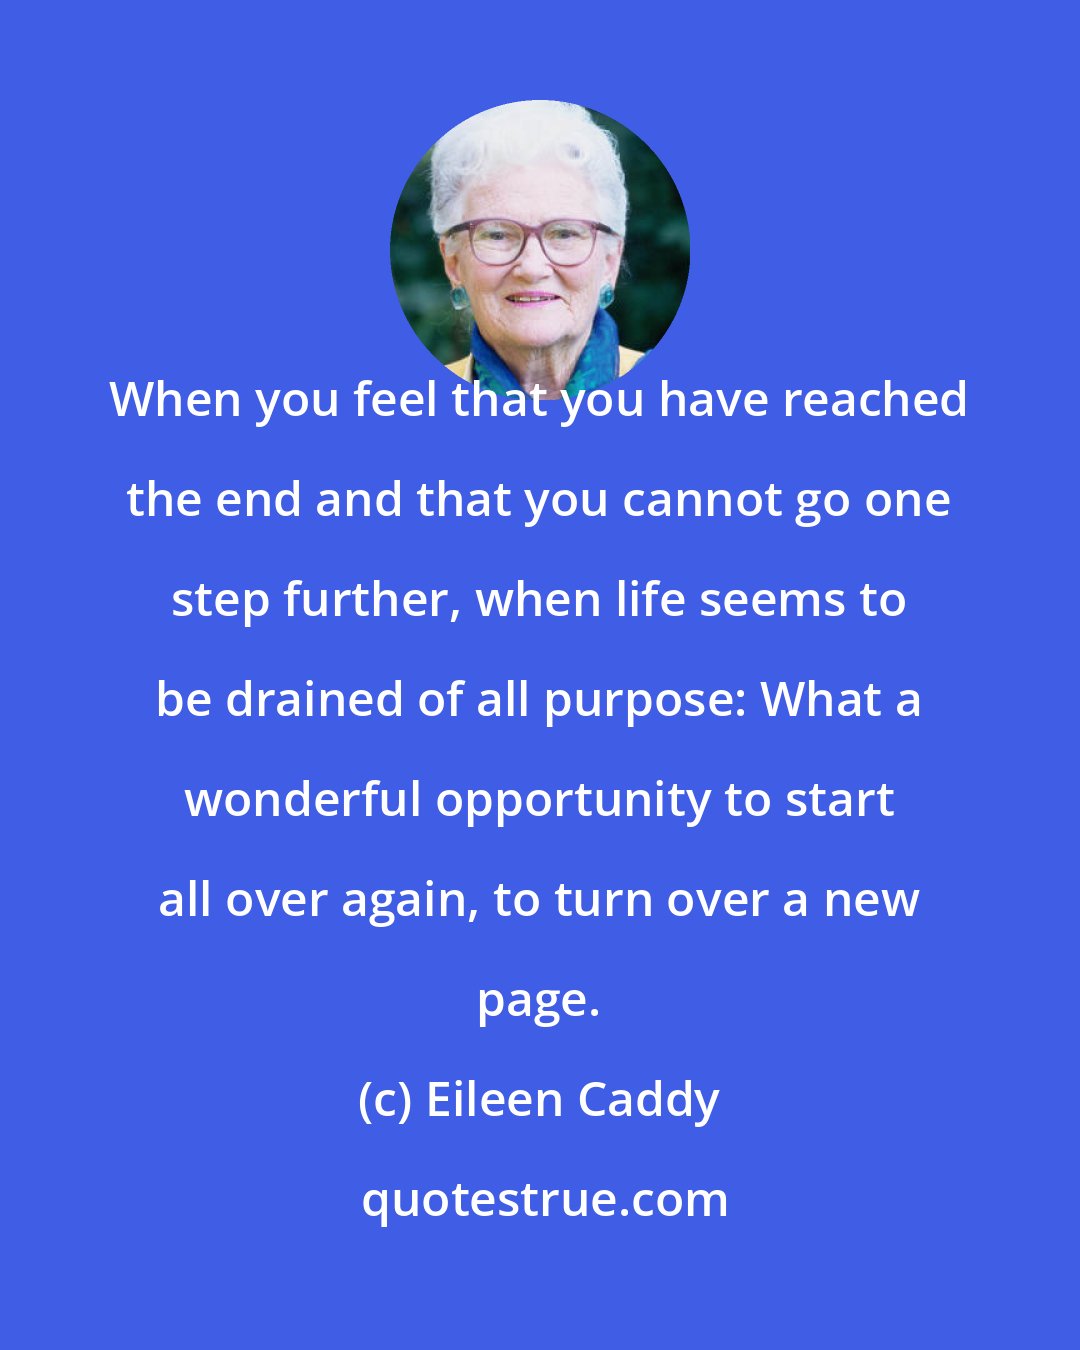 Eileen Caddy: When you feel that you have reached the end and that you cannot go one step further, when life seems to be drained of all purpose: What a wonderful opportunity to start all over again, to turn over a new page.